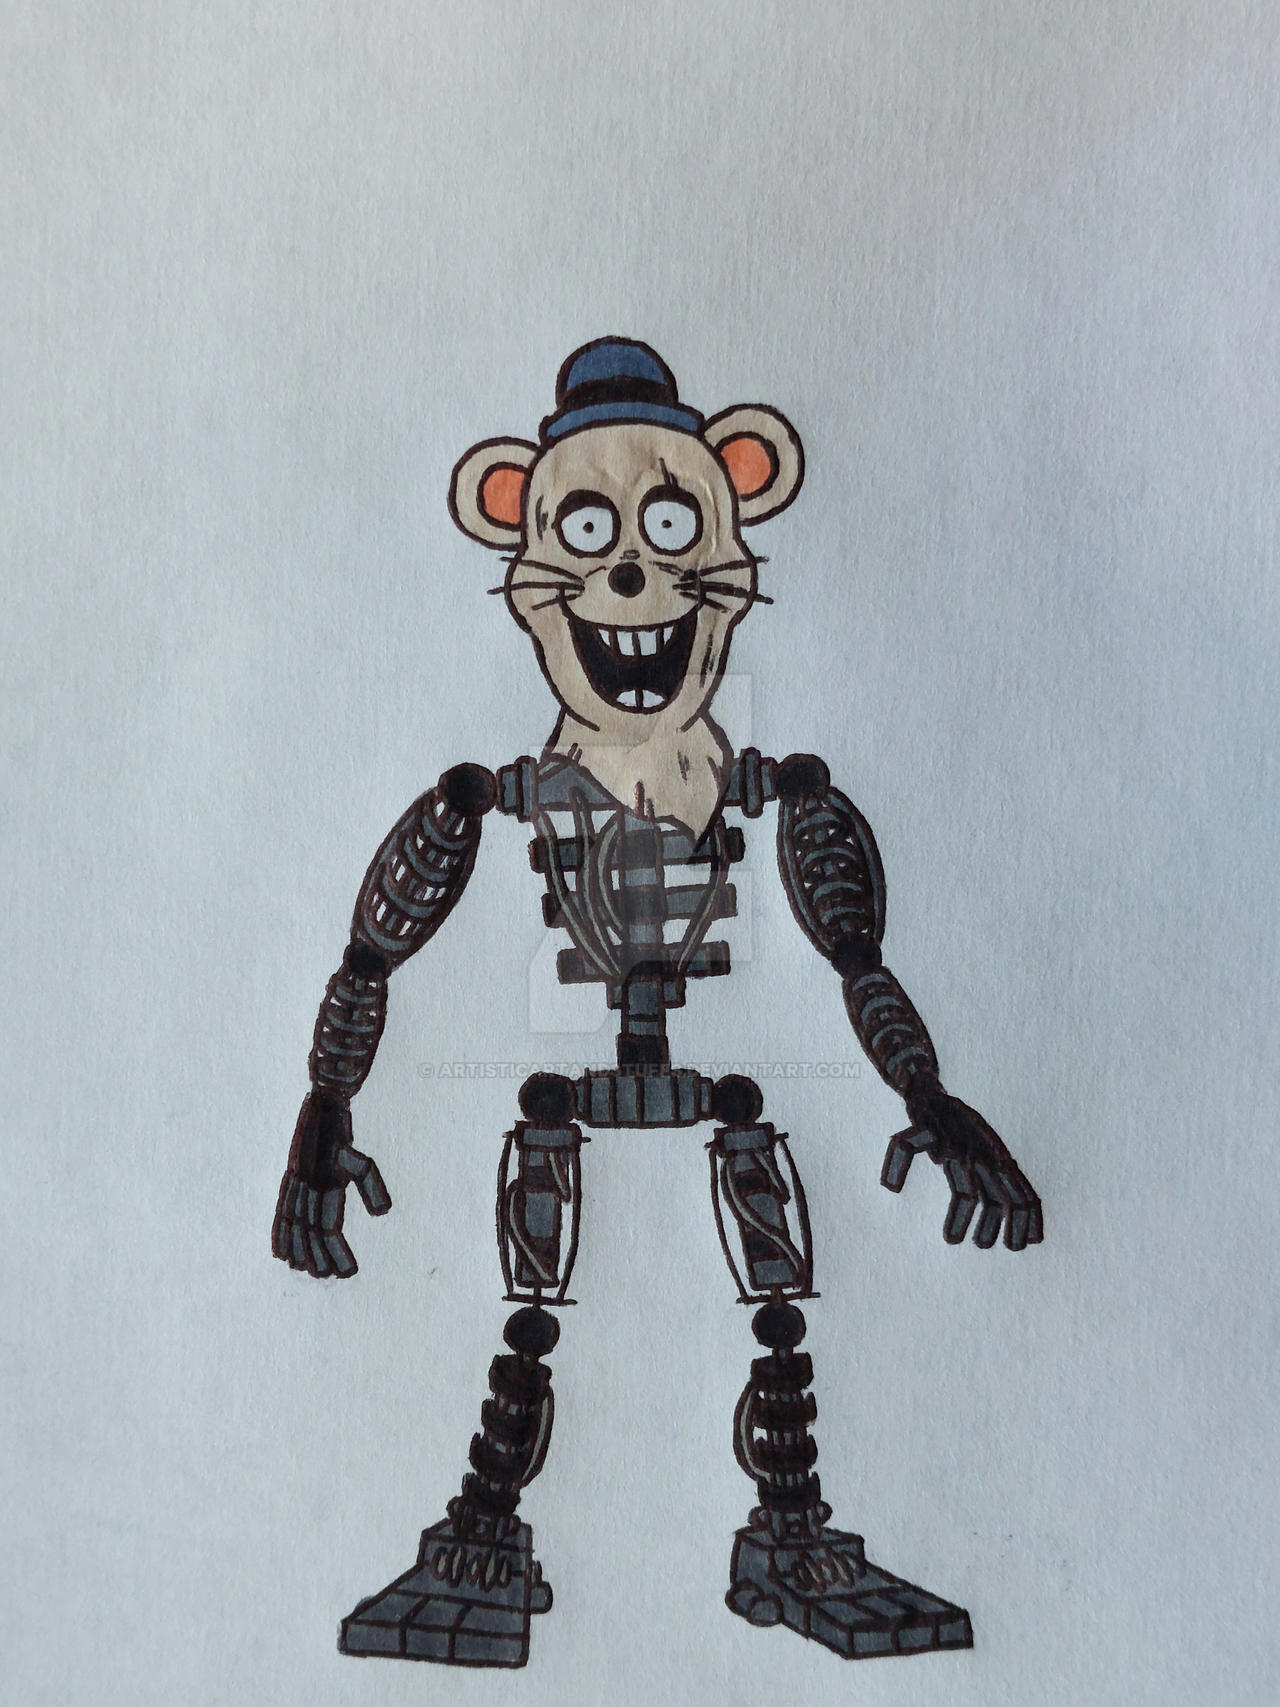 Withered foxy swap by NightmareFred2058 on DeviantArt